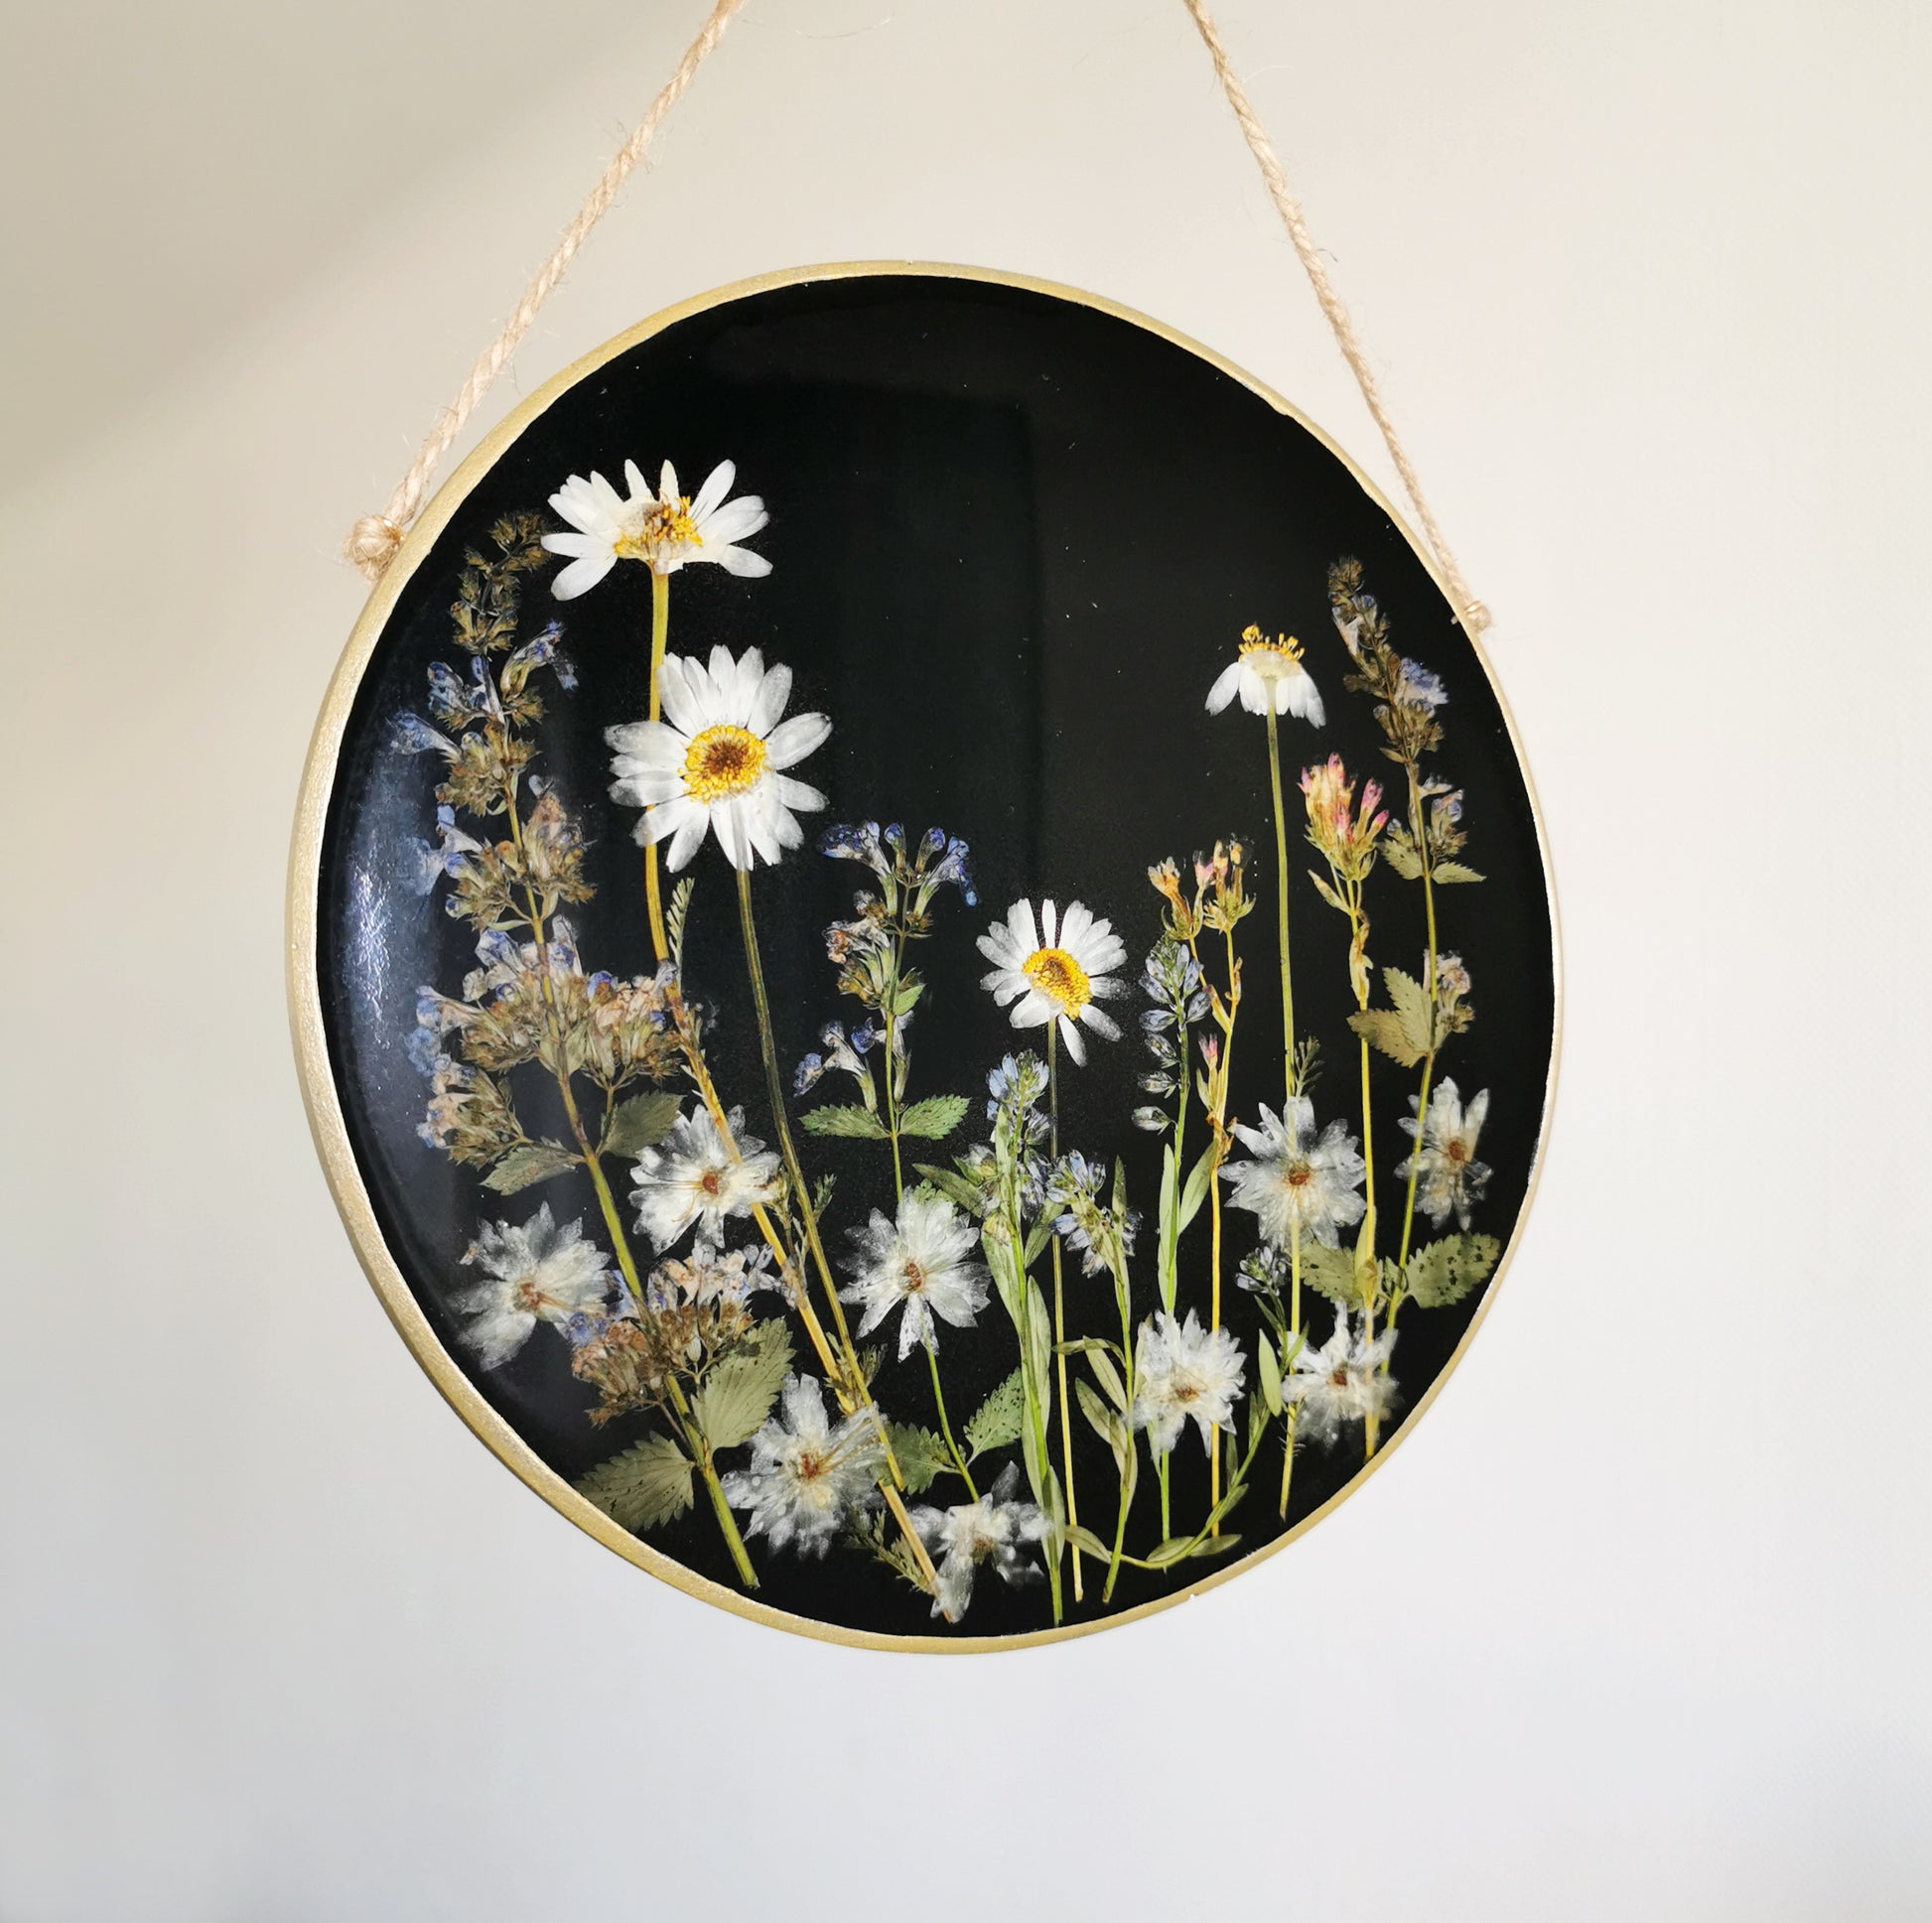 Floral wall hanging Boho home decor Pressed flower resin wall art Circle flower frame